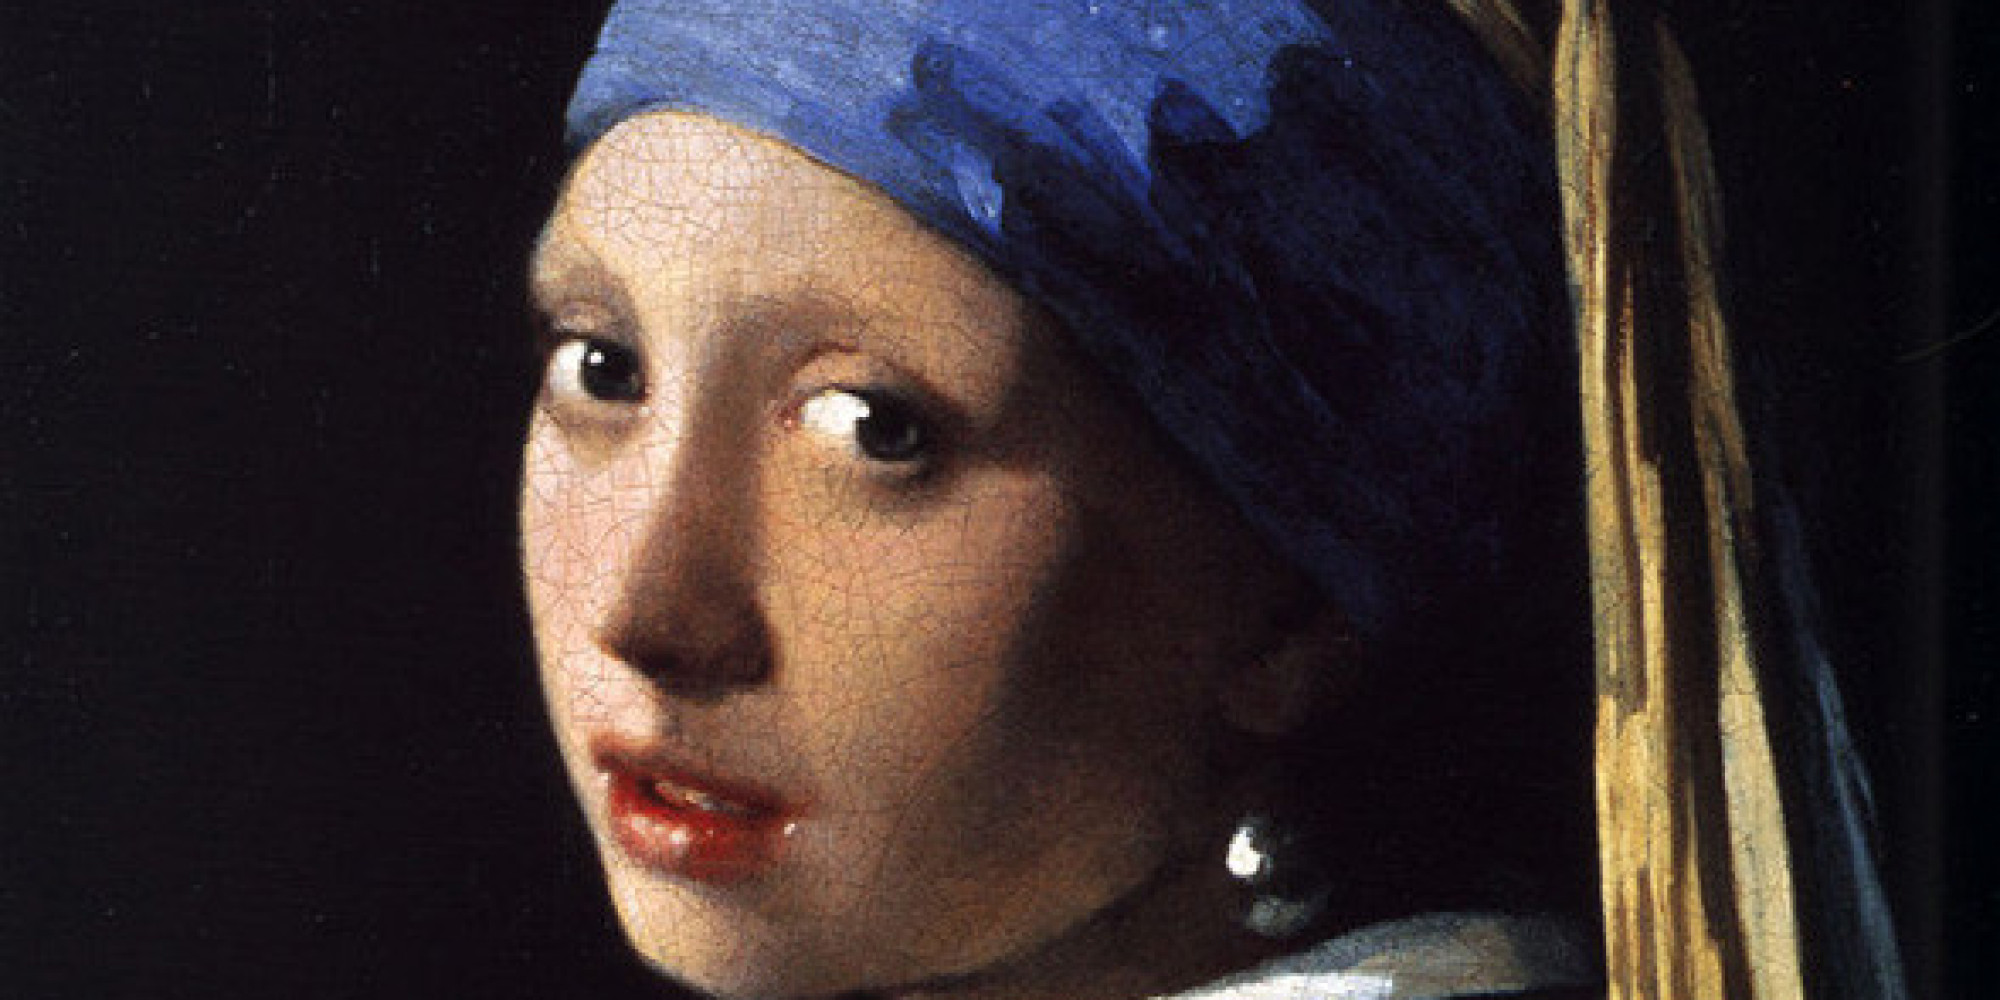 Girl with a Pearl Earring, oil on canvas, 1665.